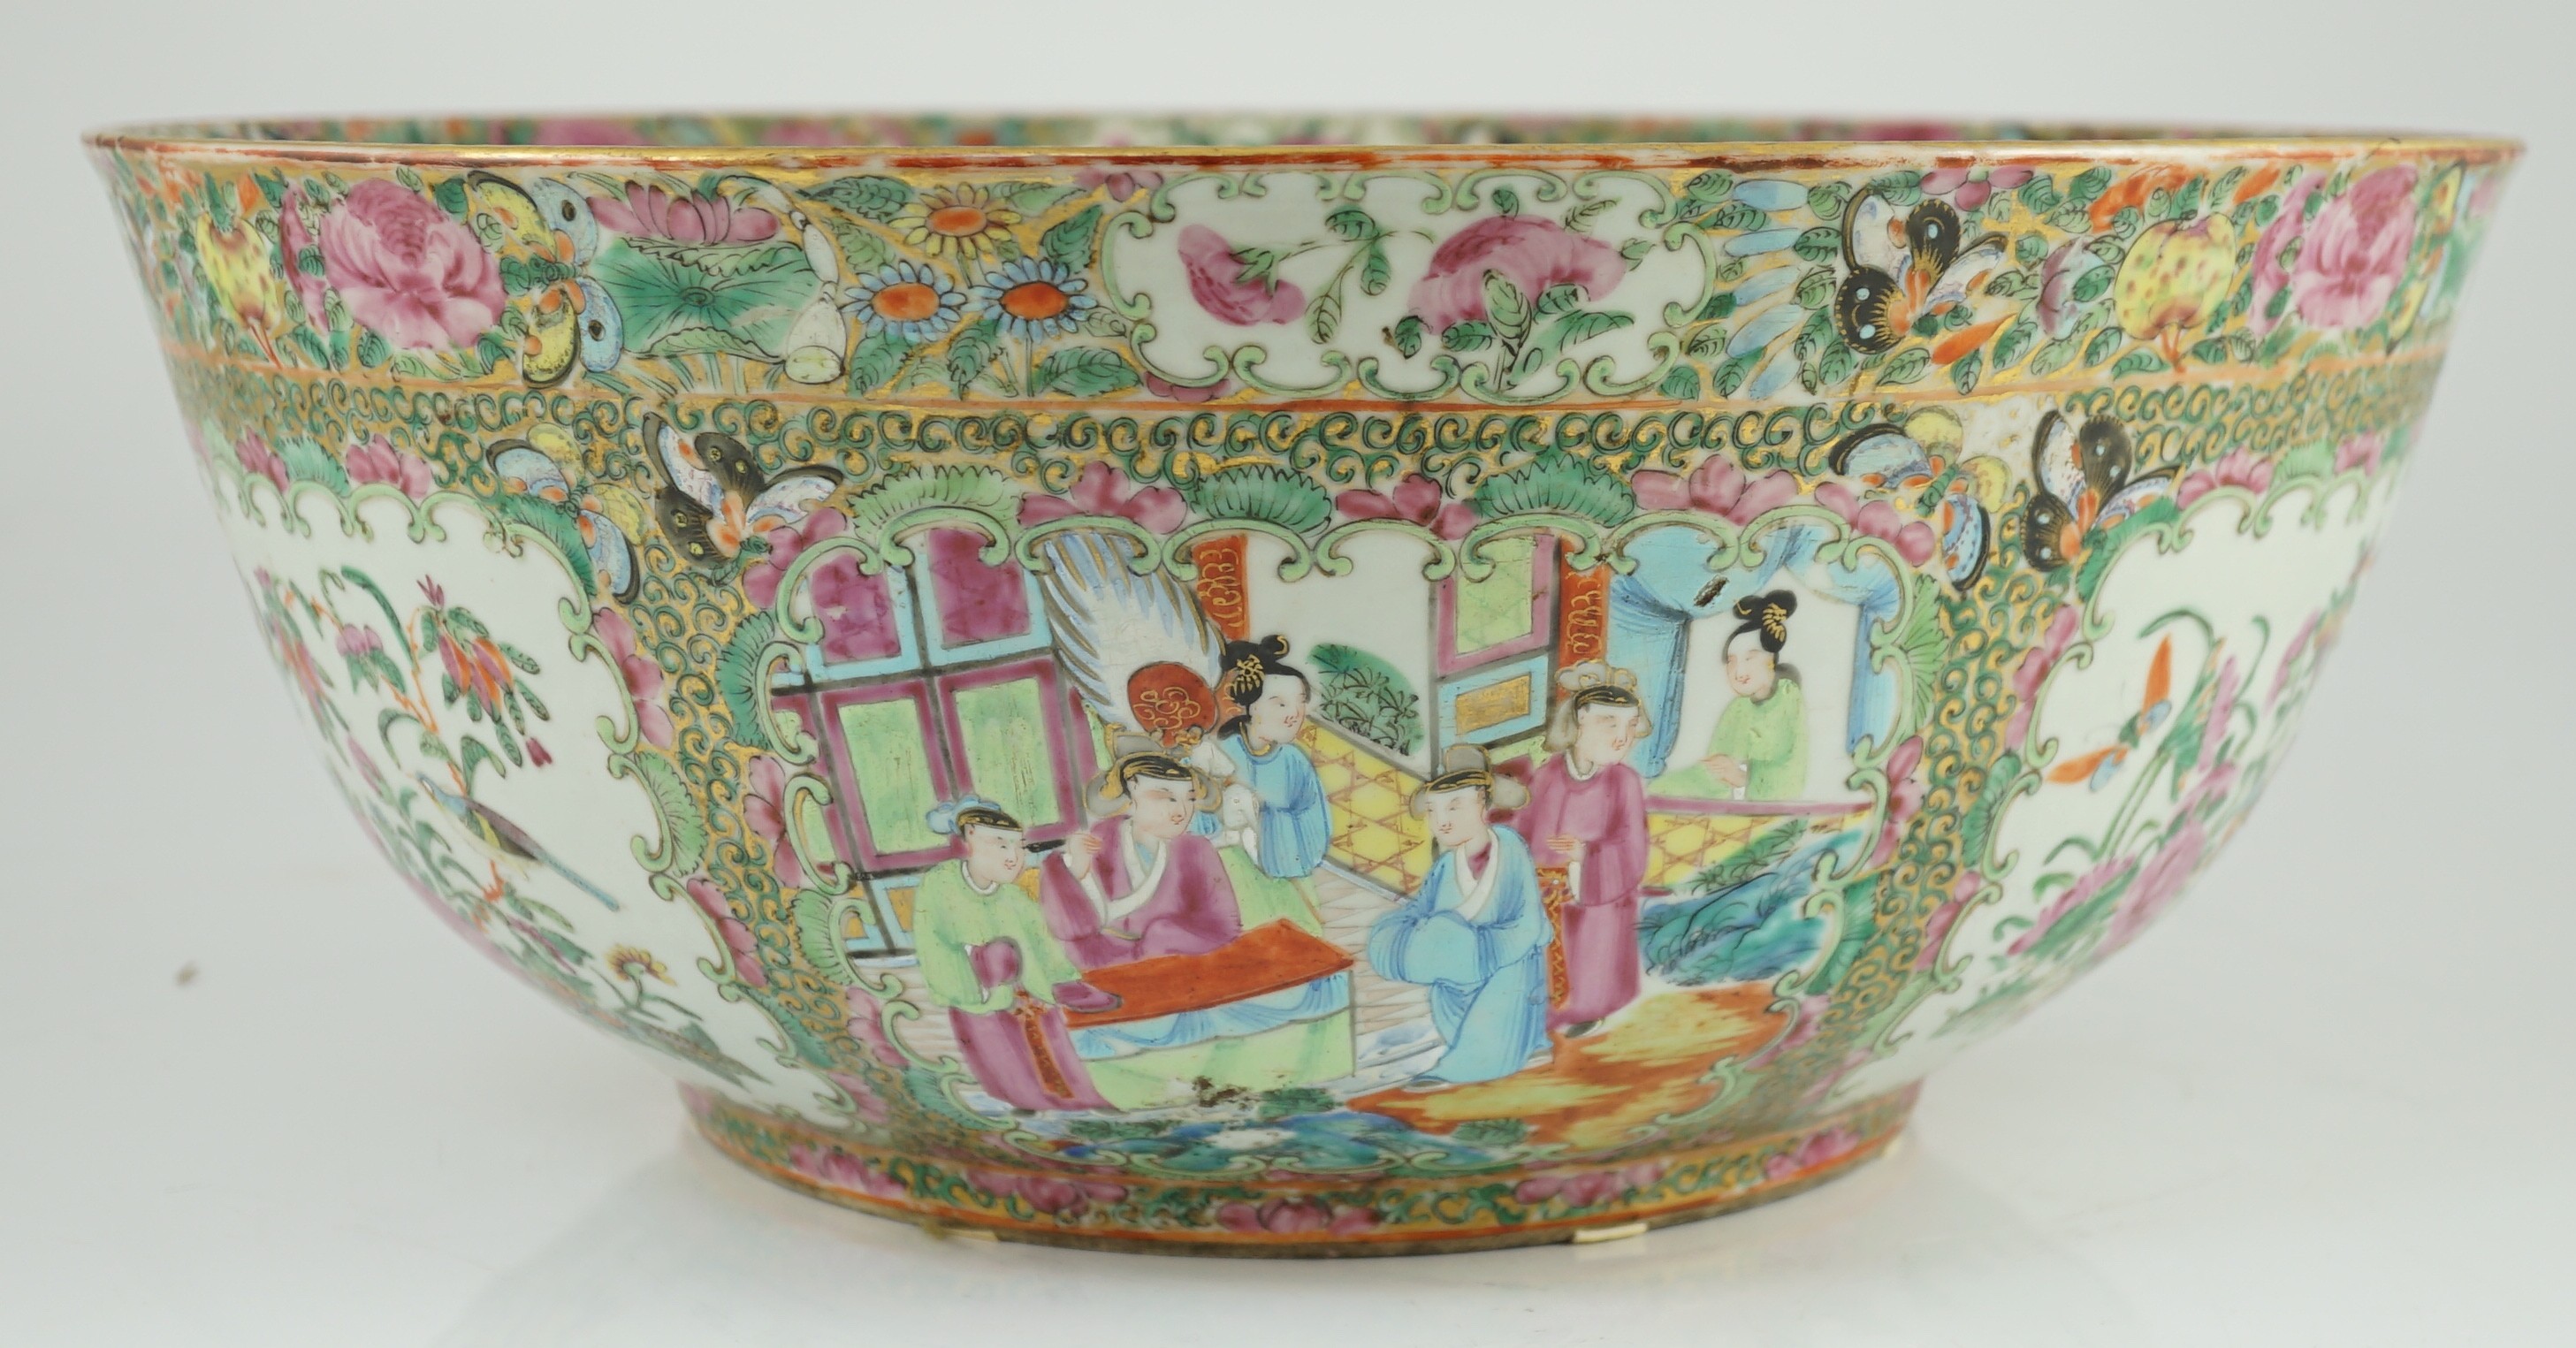 A large Chinese Canton (Guangzhou) decorated famille rose bowl, c.1830-50, typically painted to - Image 5 of 9